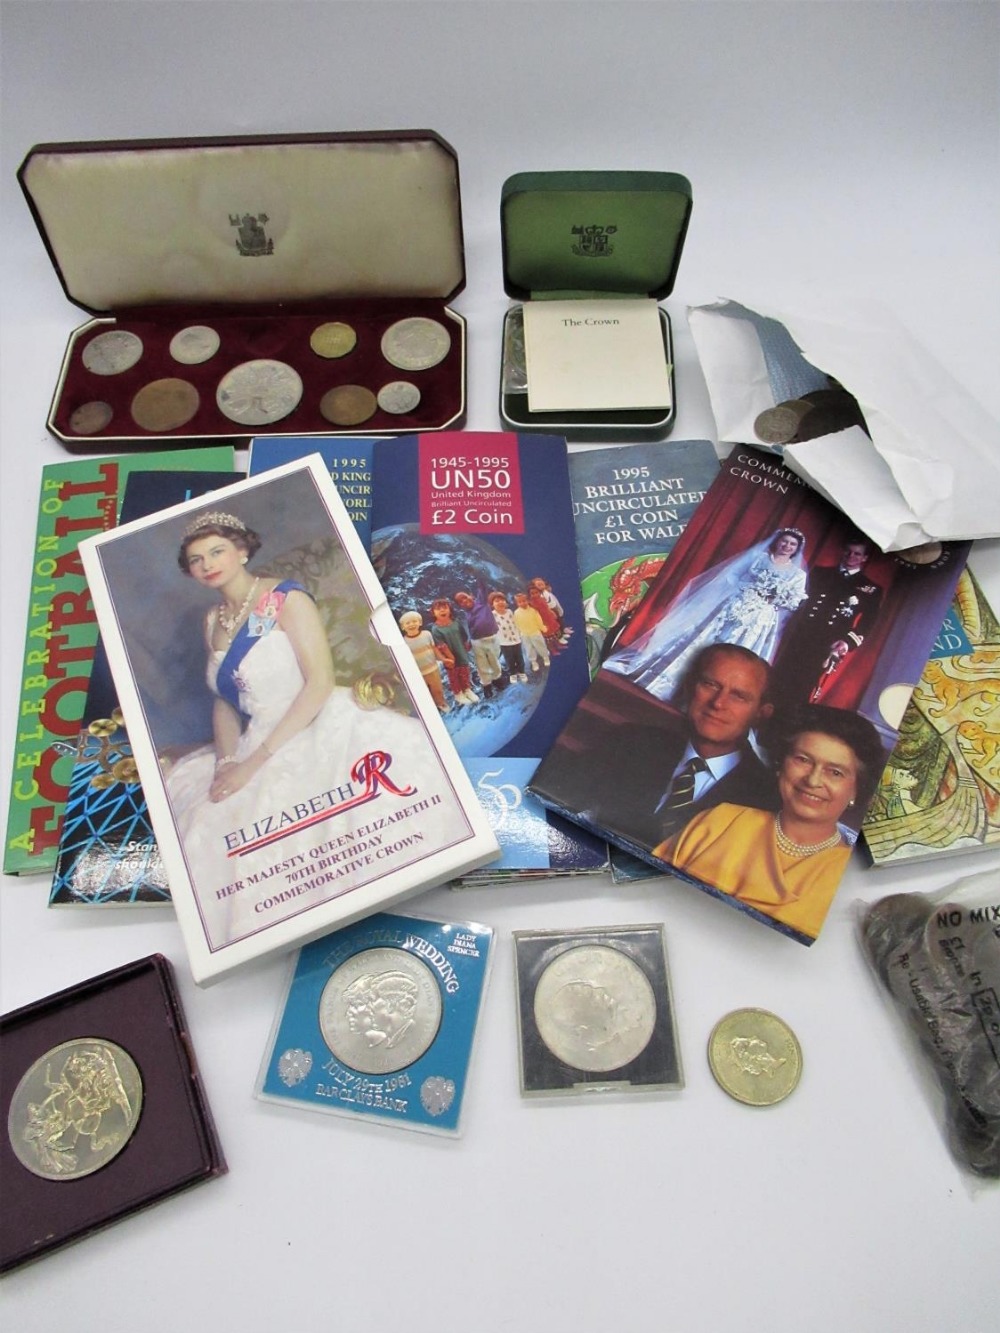 Collection of commemorative £2 coins including 1997, Celebration of Football, United Nation 1945-